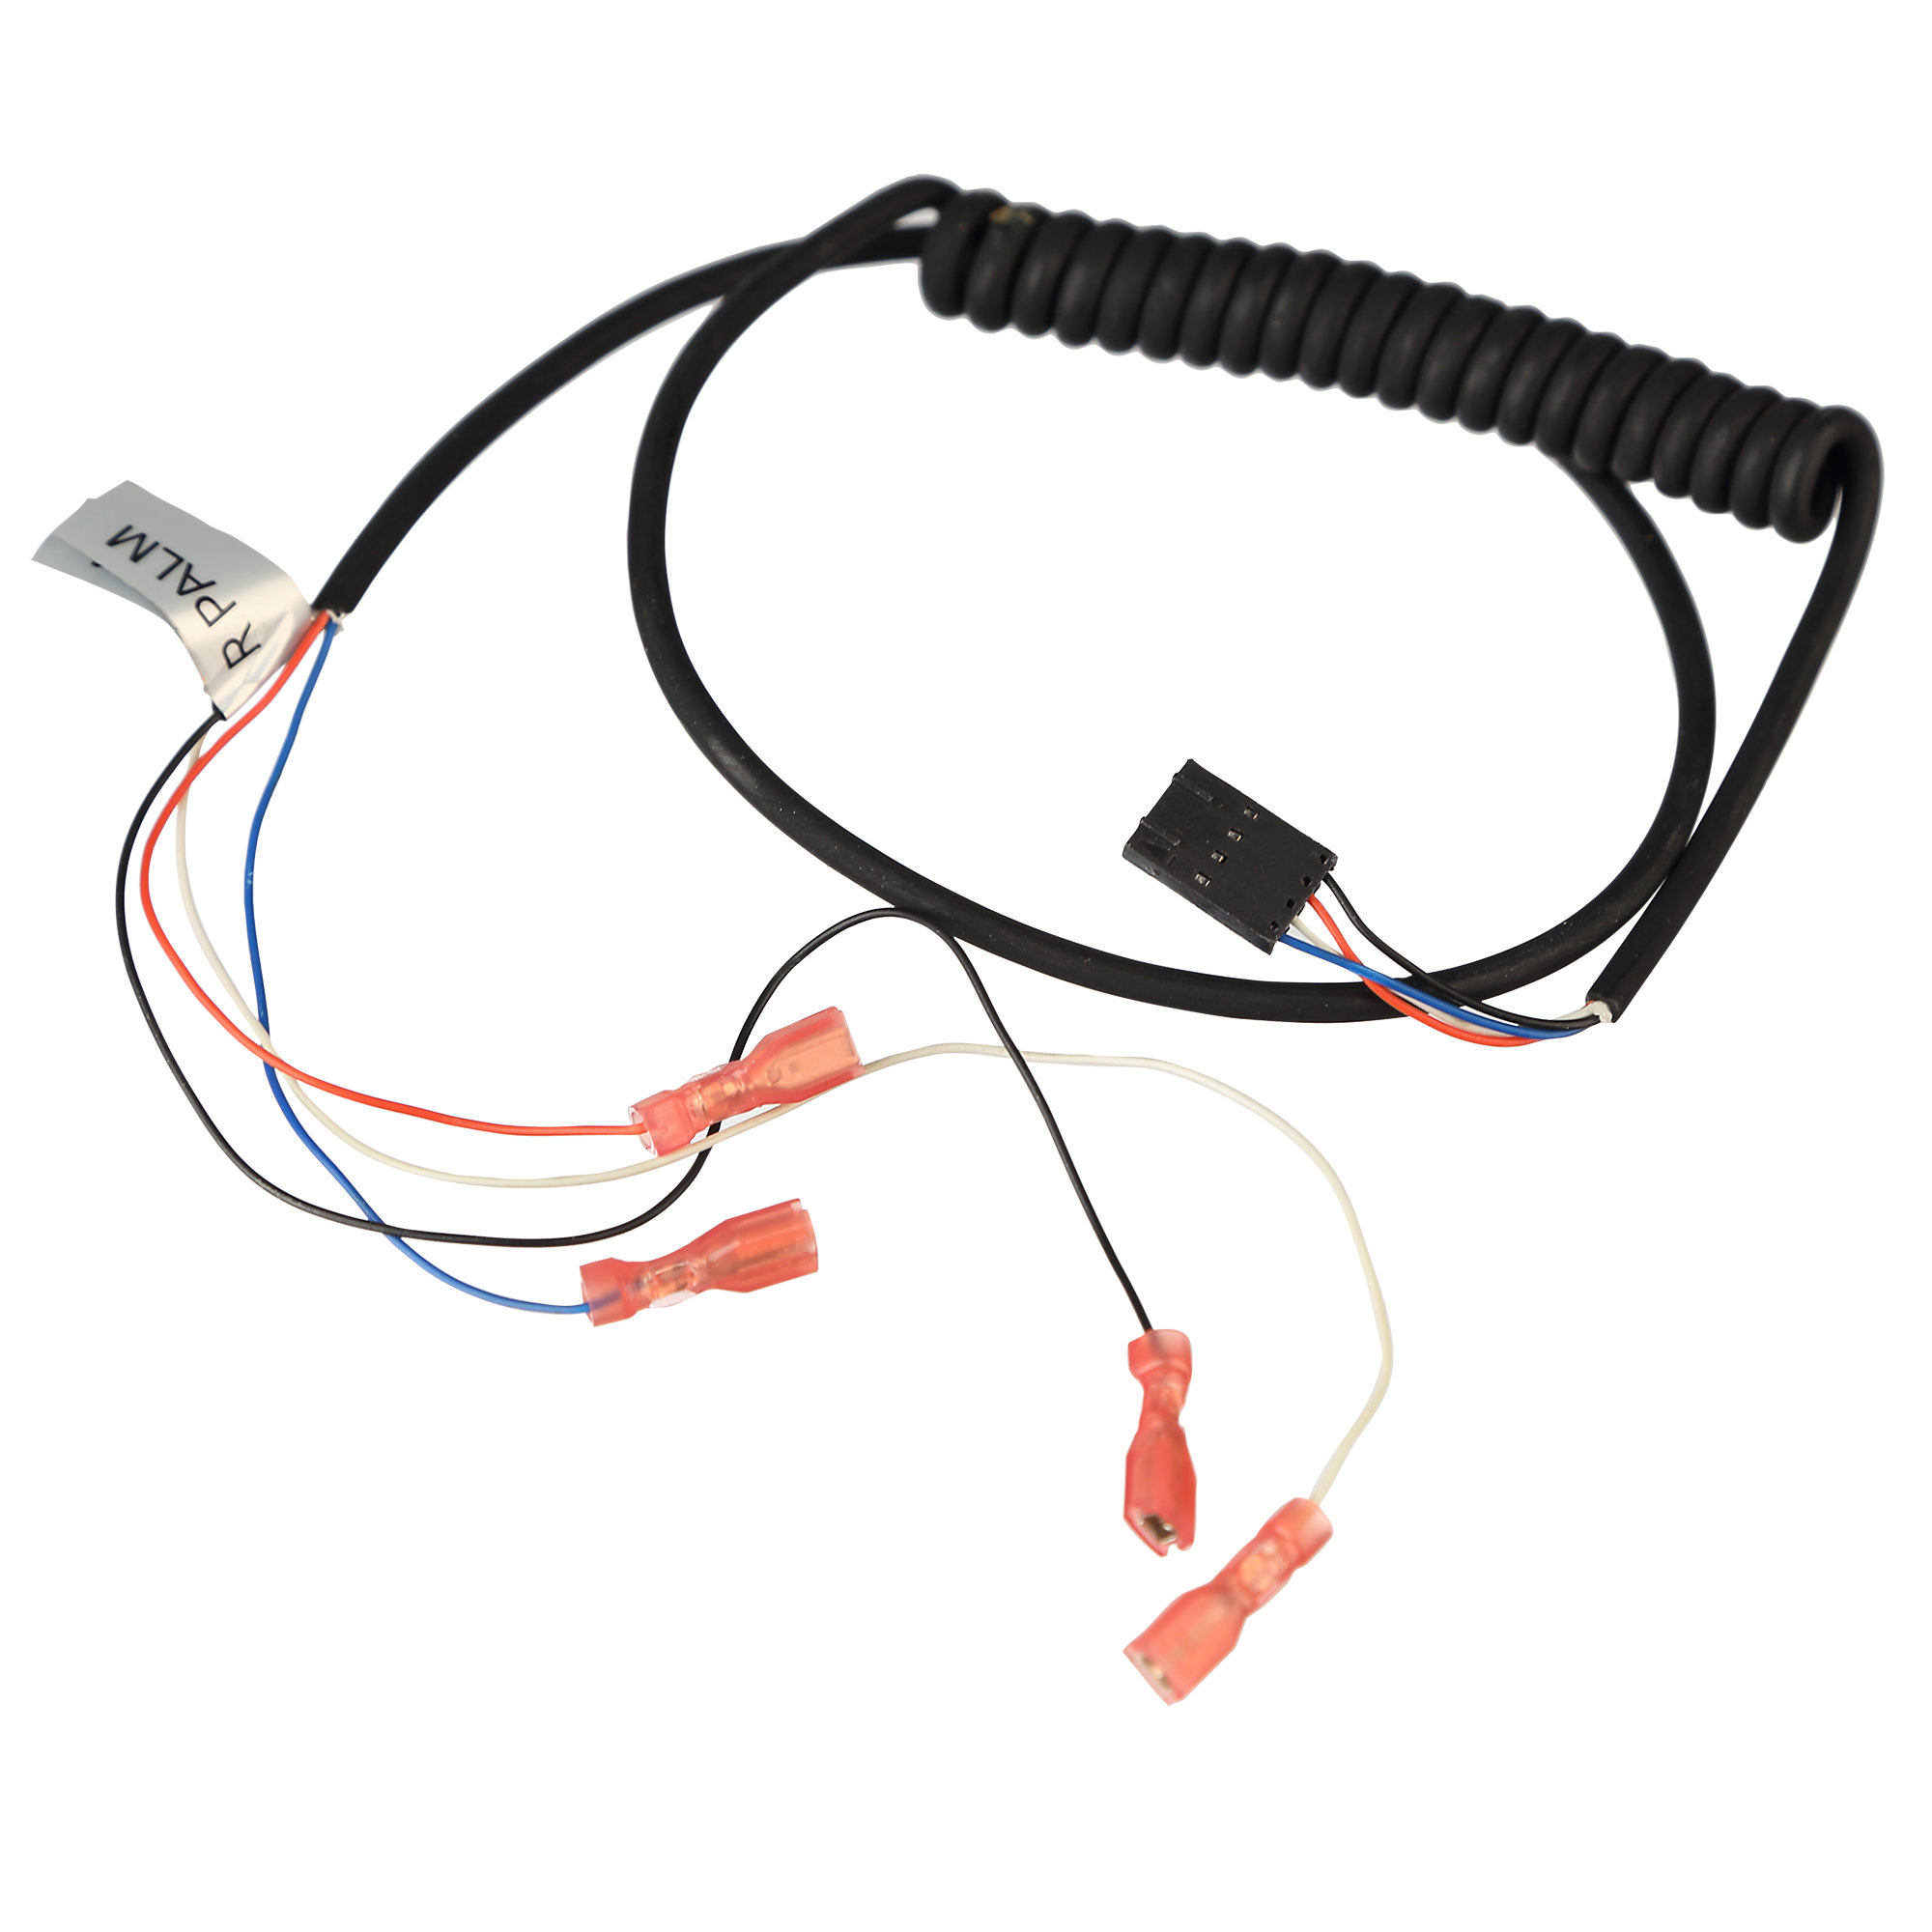 Cable for HR Grip, Star Trac